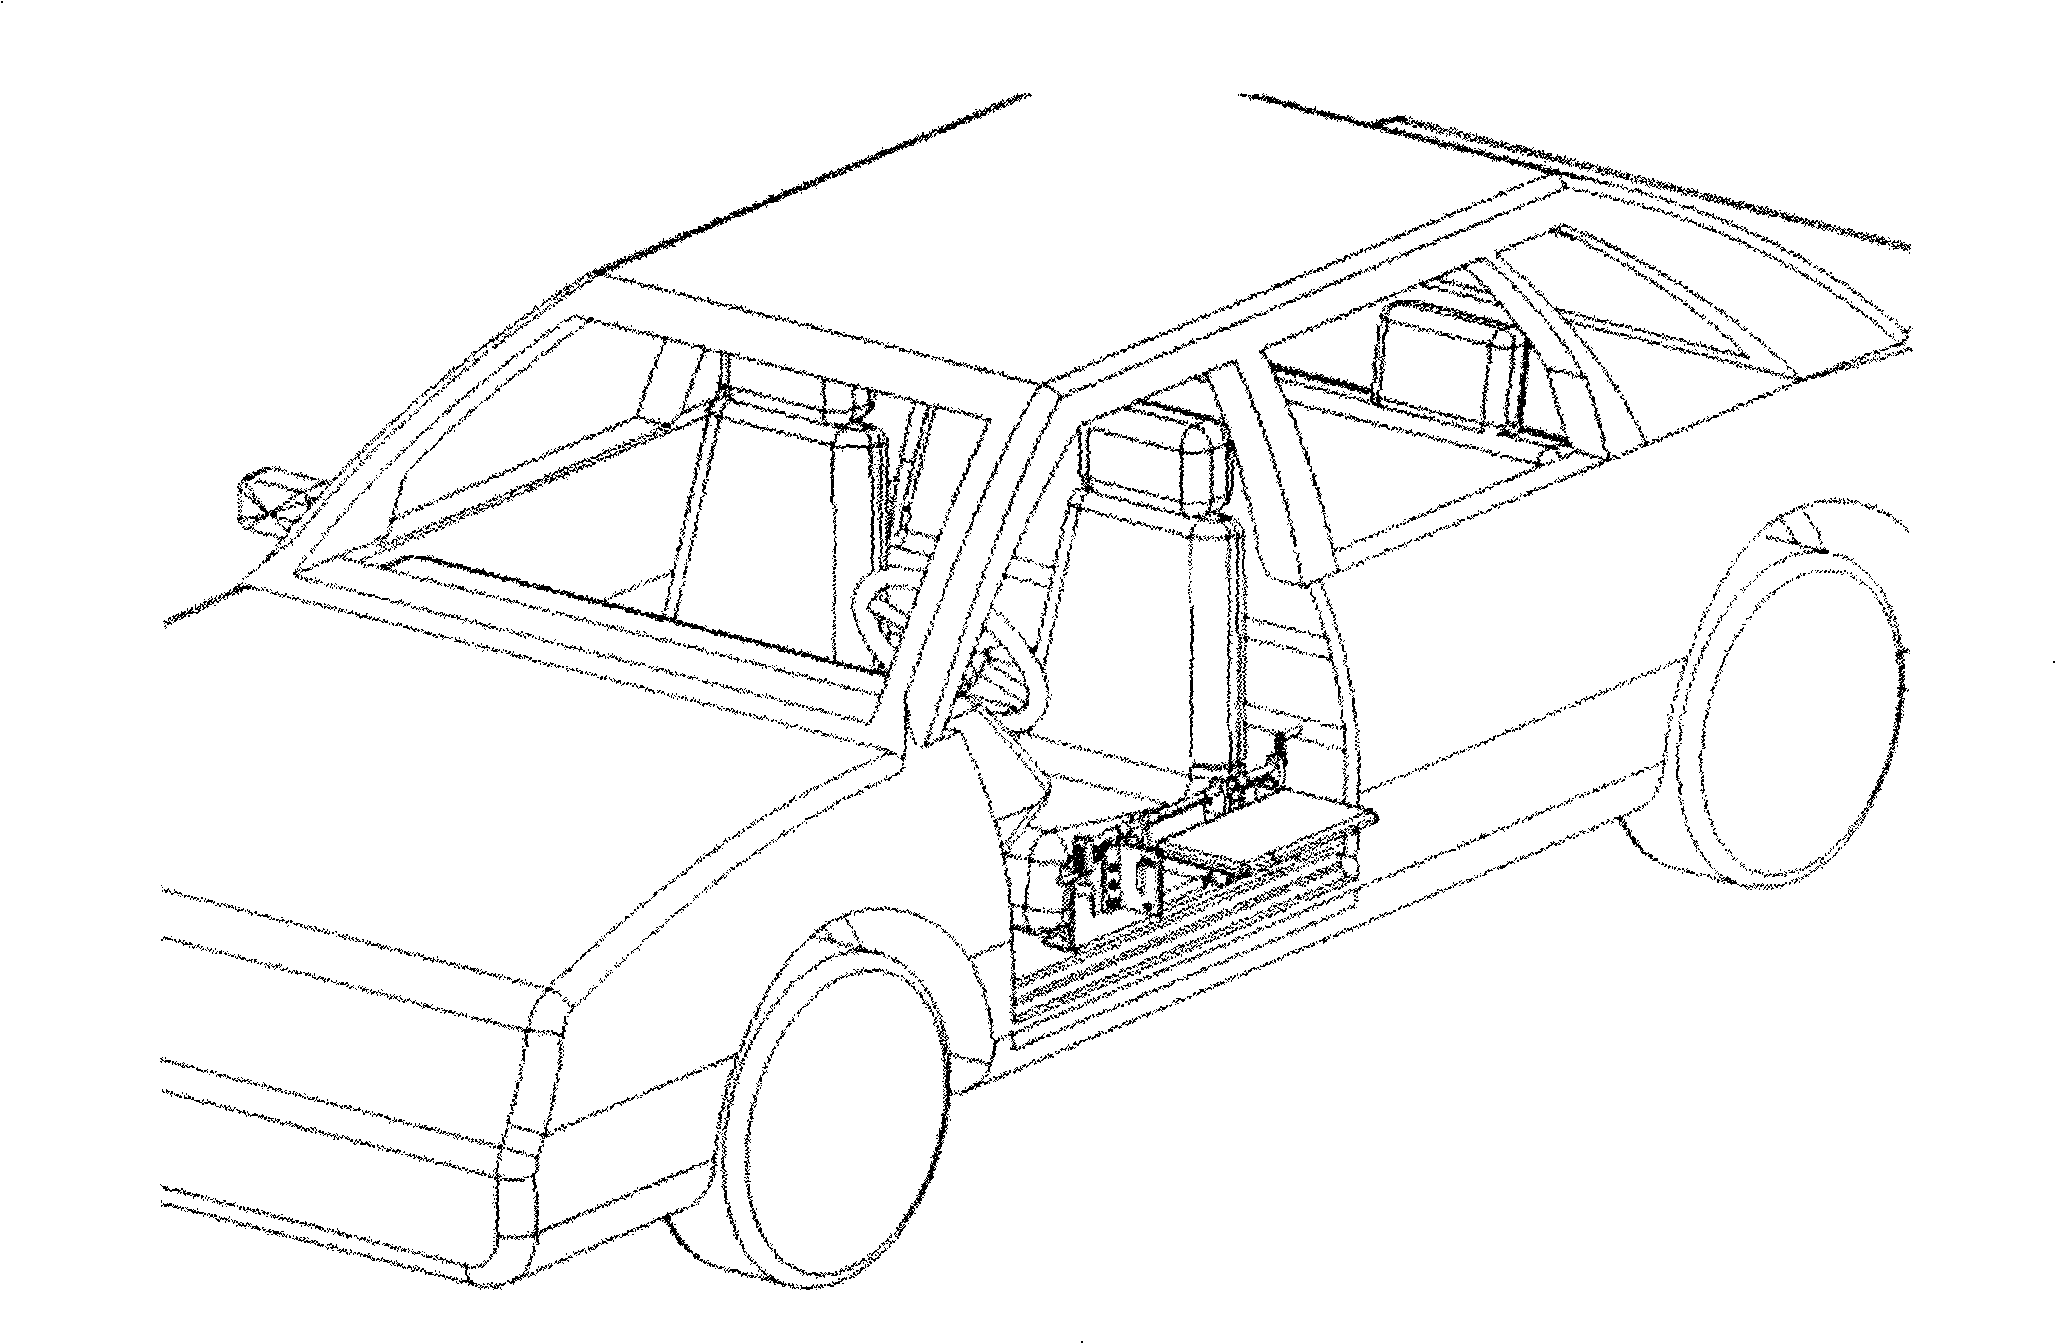 Auxiliary apparatus for getting on/down car driven by the physical disabilities